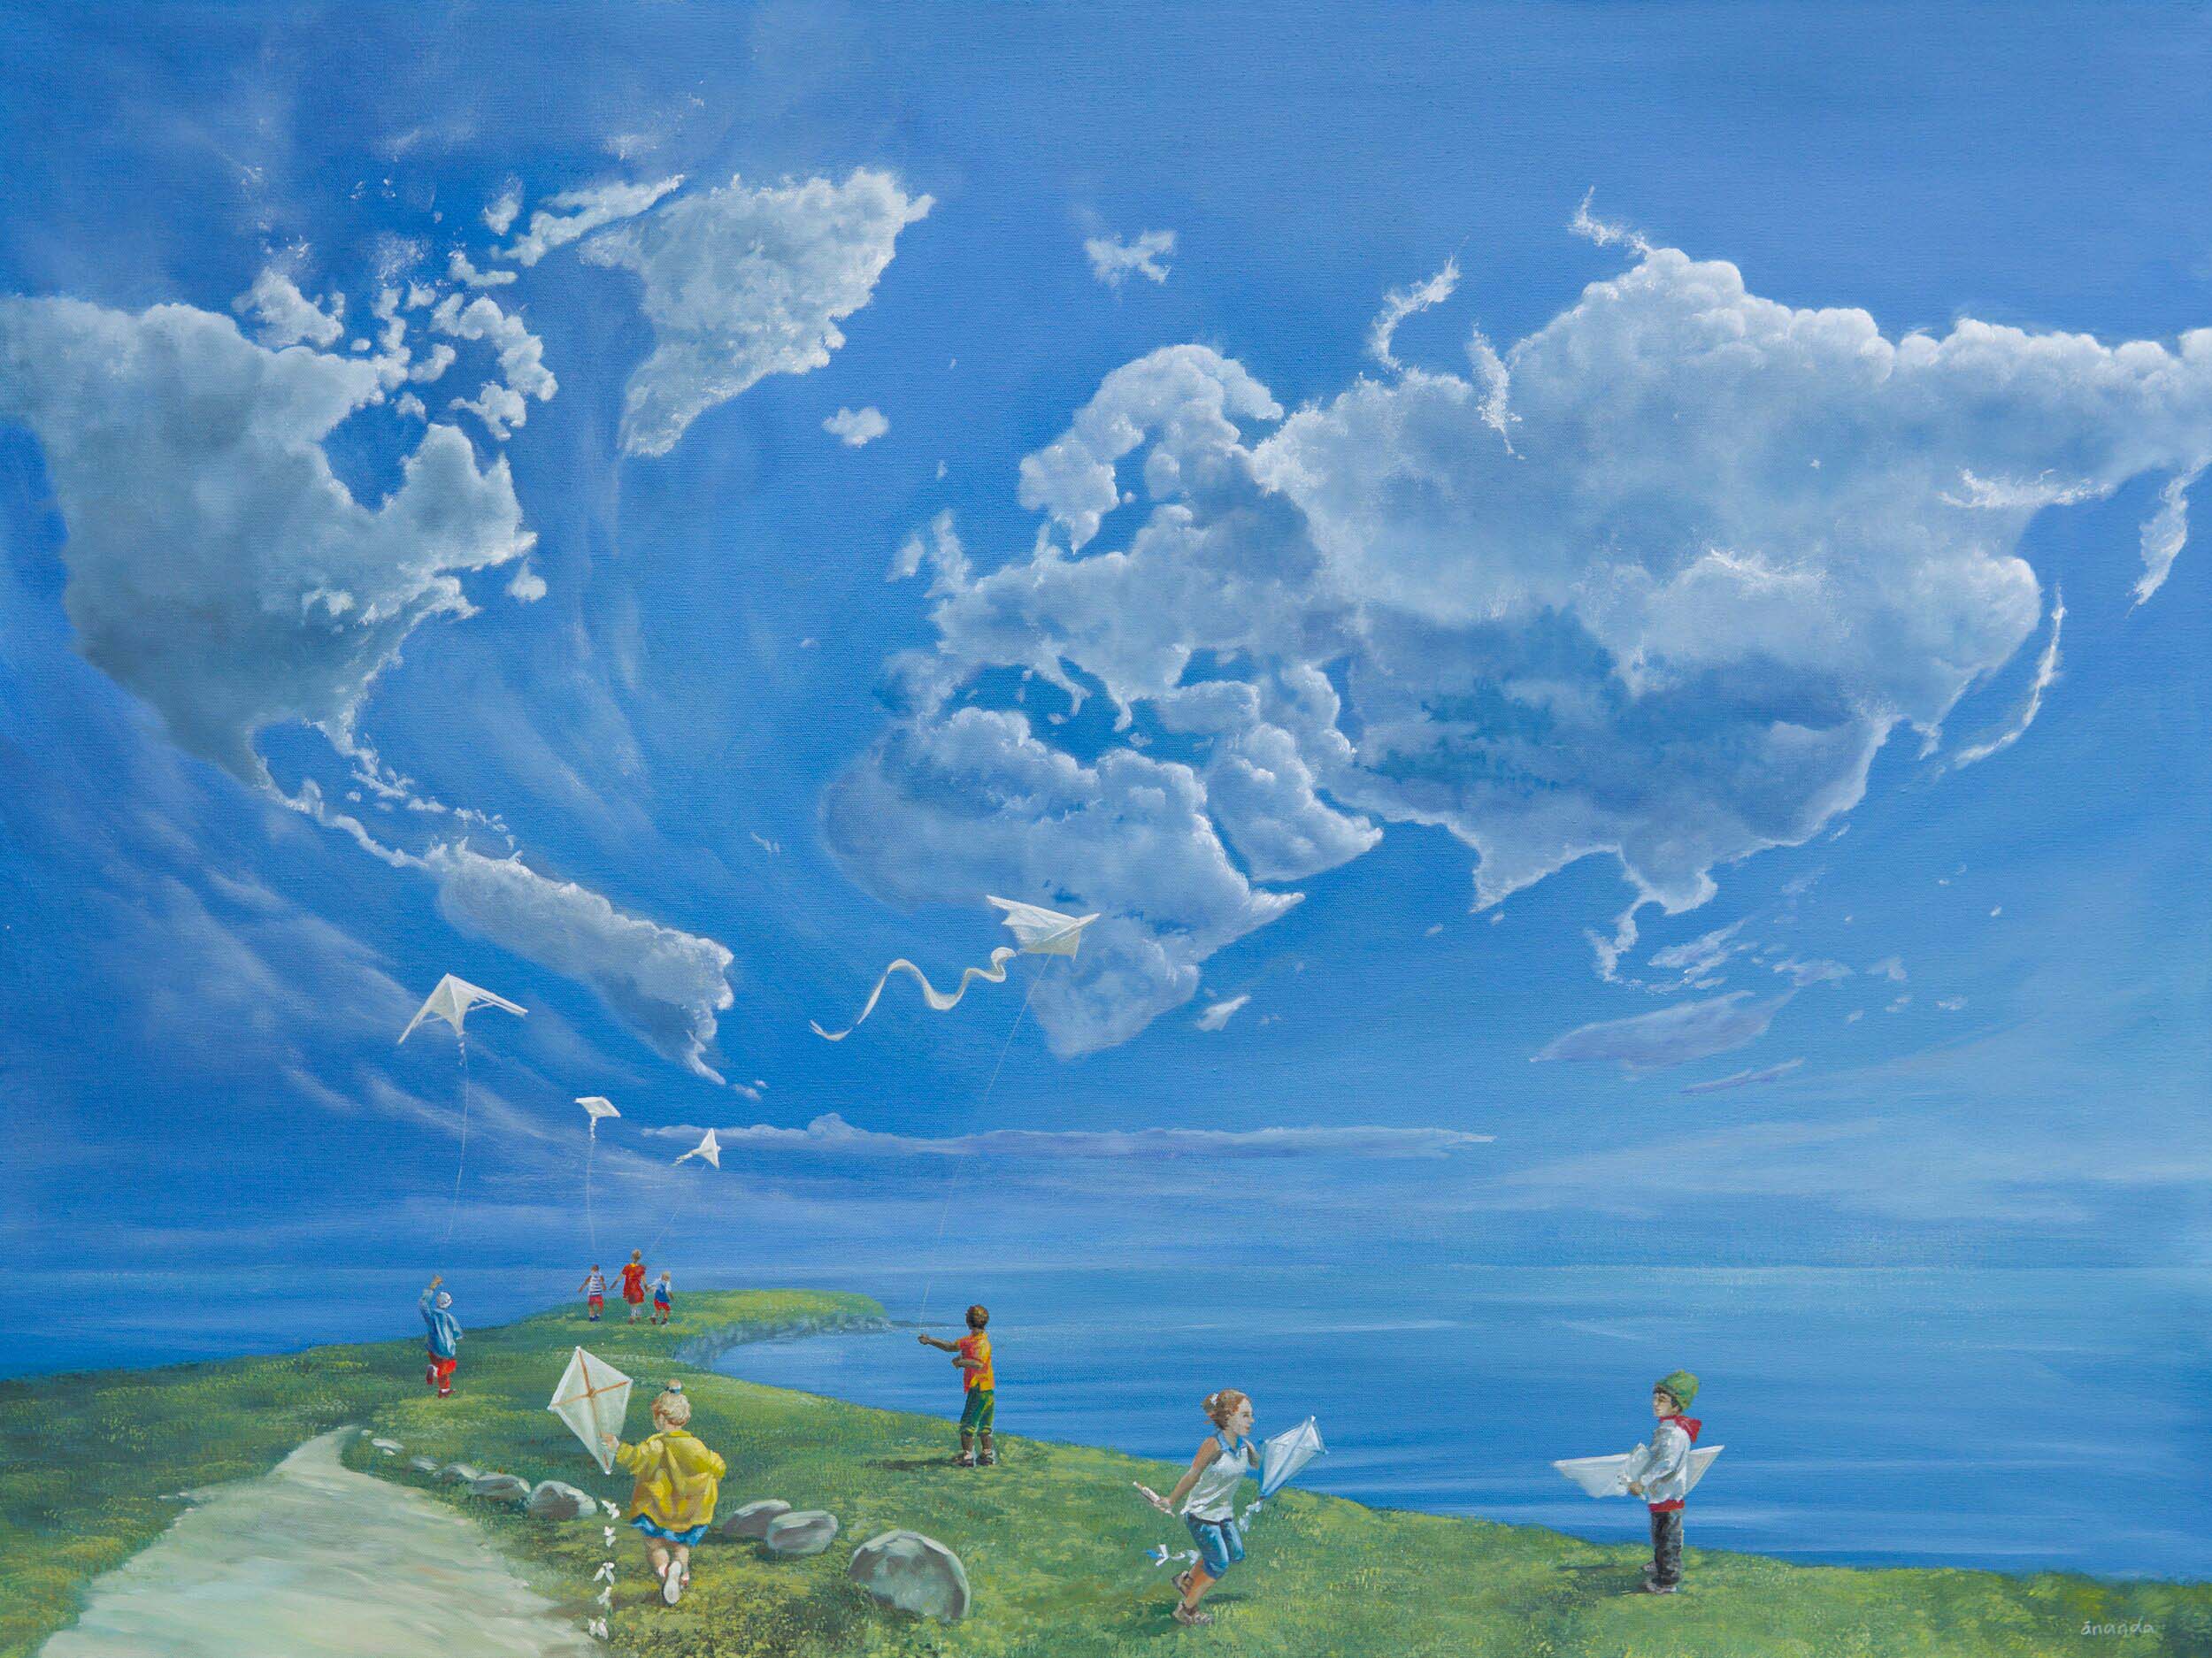 Contemporary Landscape Art. Title: Peace for all, Oil on Canvas, 36 x 48 in by Canadian Artist Ananda Dhama.